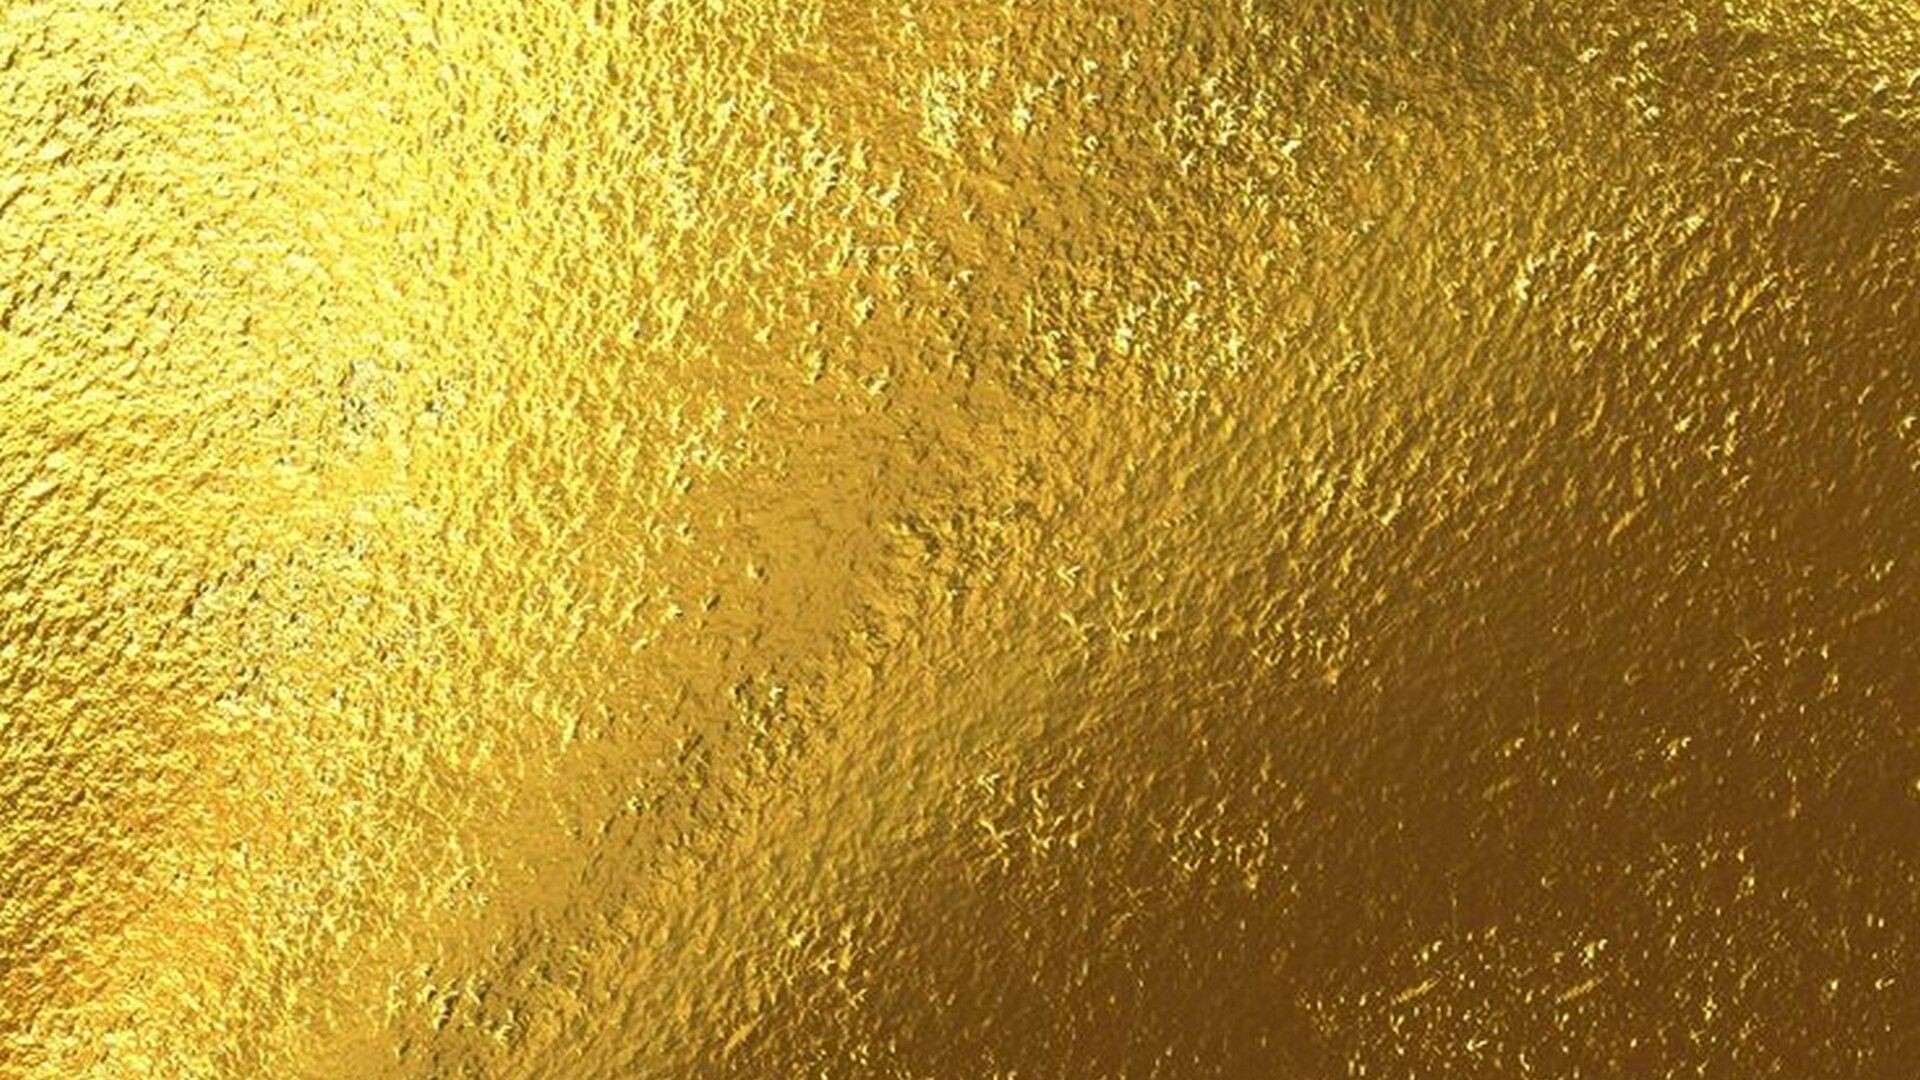 Gold Foil: The molten precious metal, The surface decorated with mechanical gilding. 1920x1080 Full HD Wallpaper.